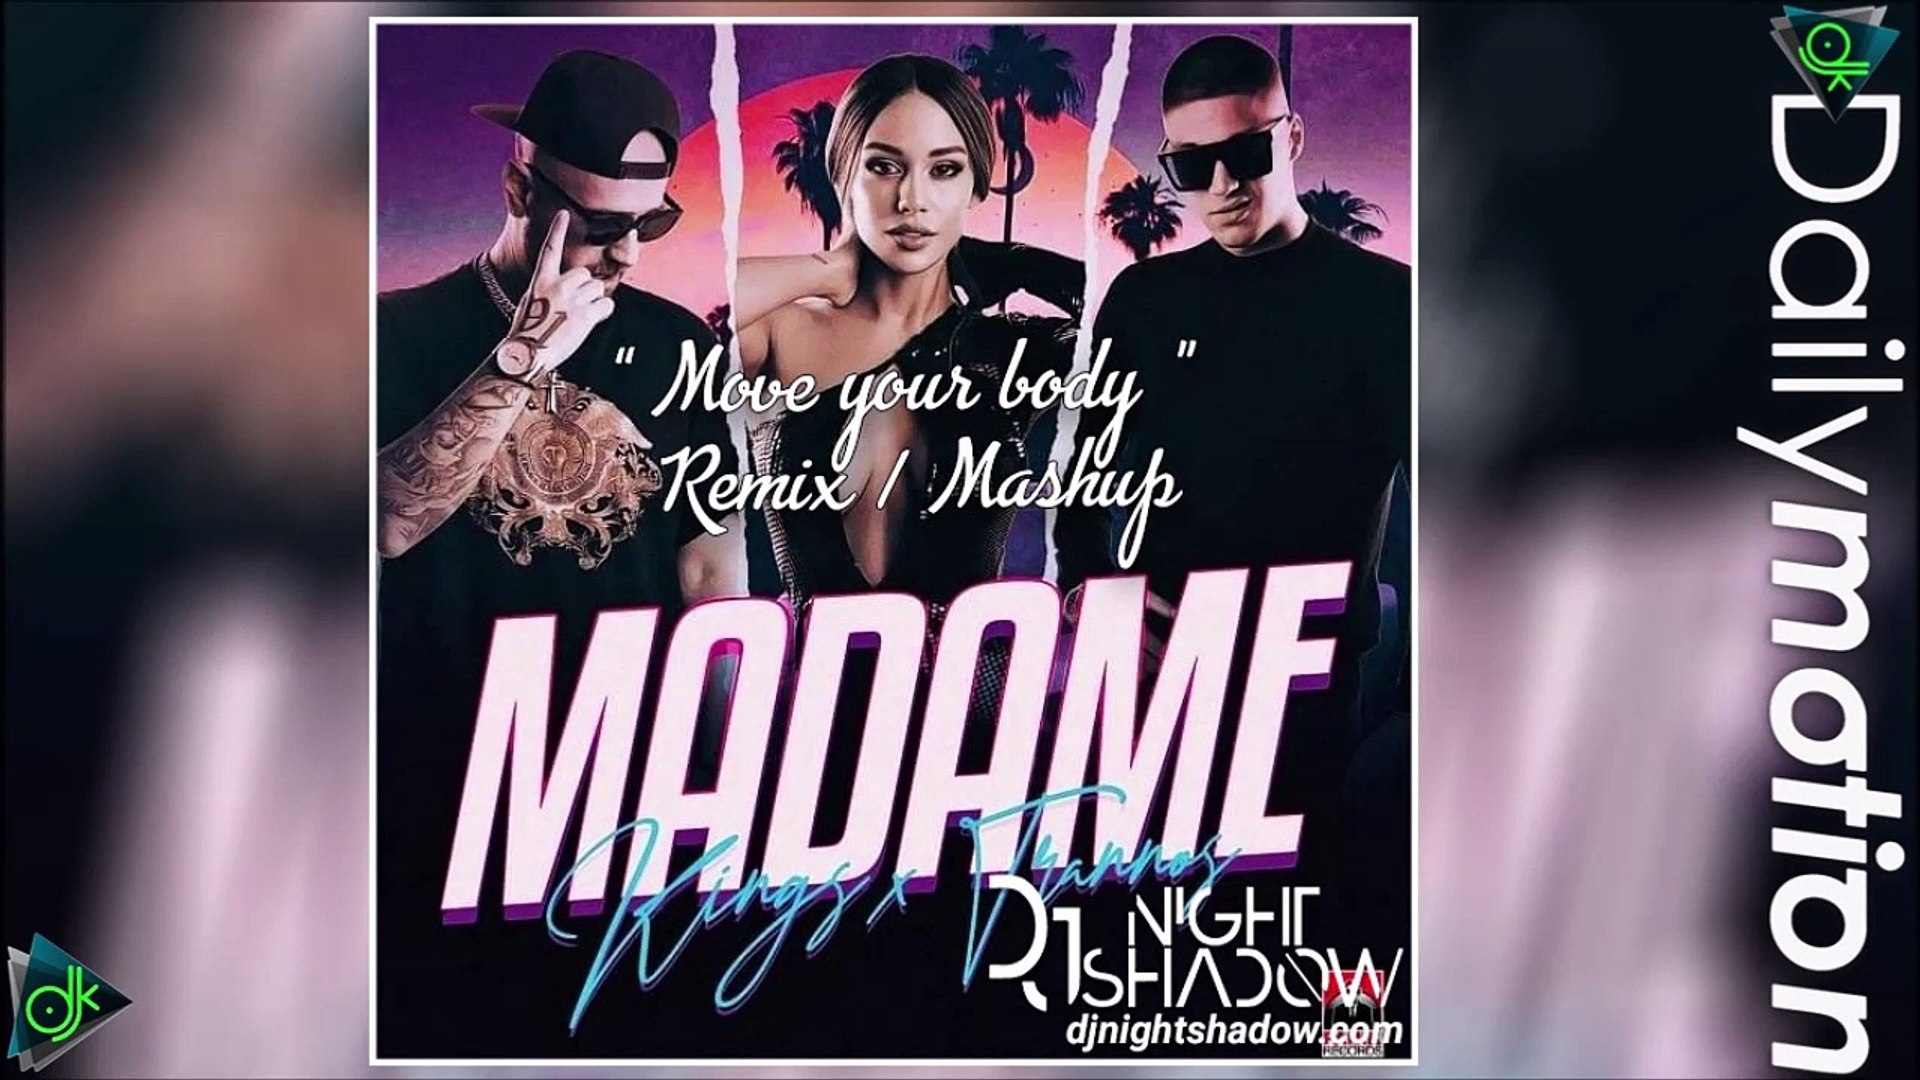 Kings x Trannos - Madame (Nightshadow's Move Your Body Remix